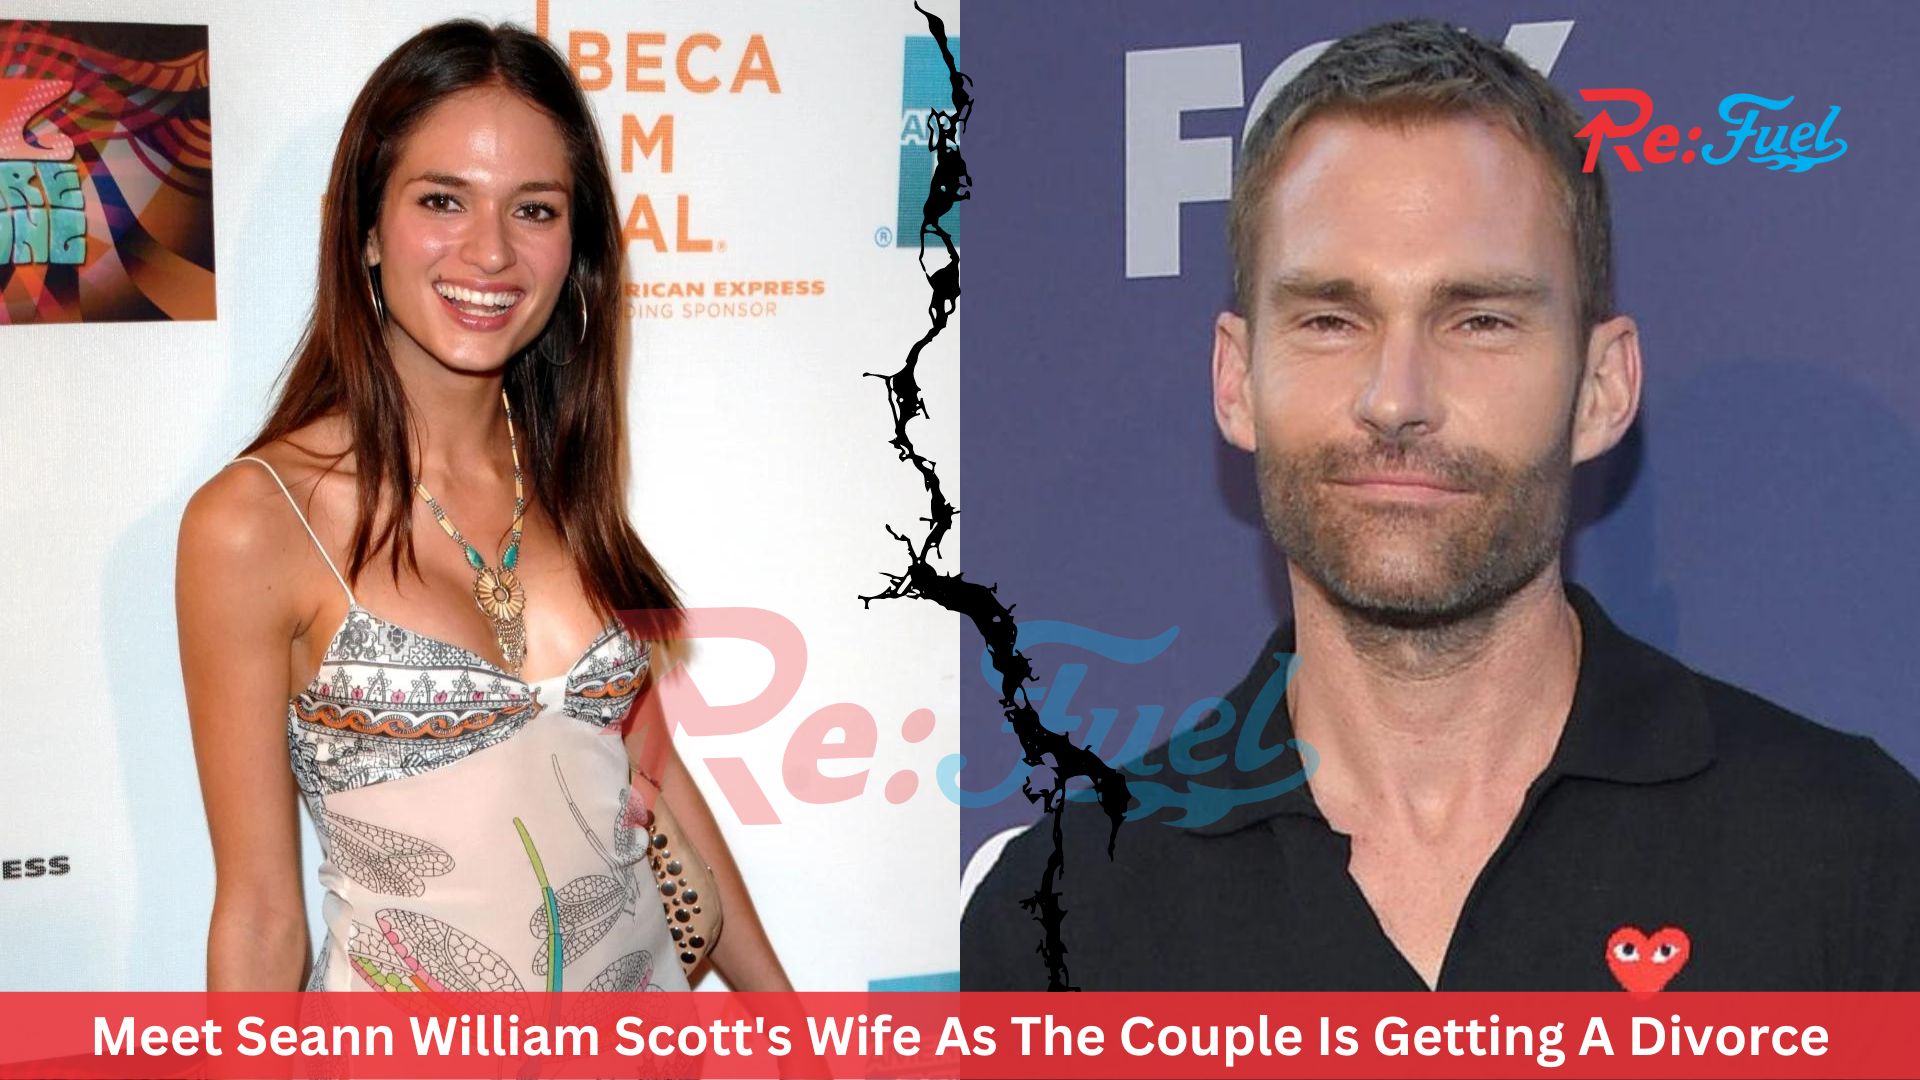 Meet Seann William Scott's Wife As The Couple Is Getting A Divorce